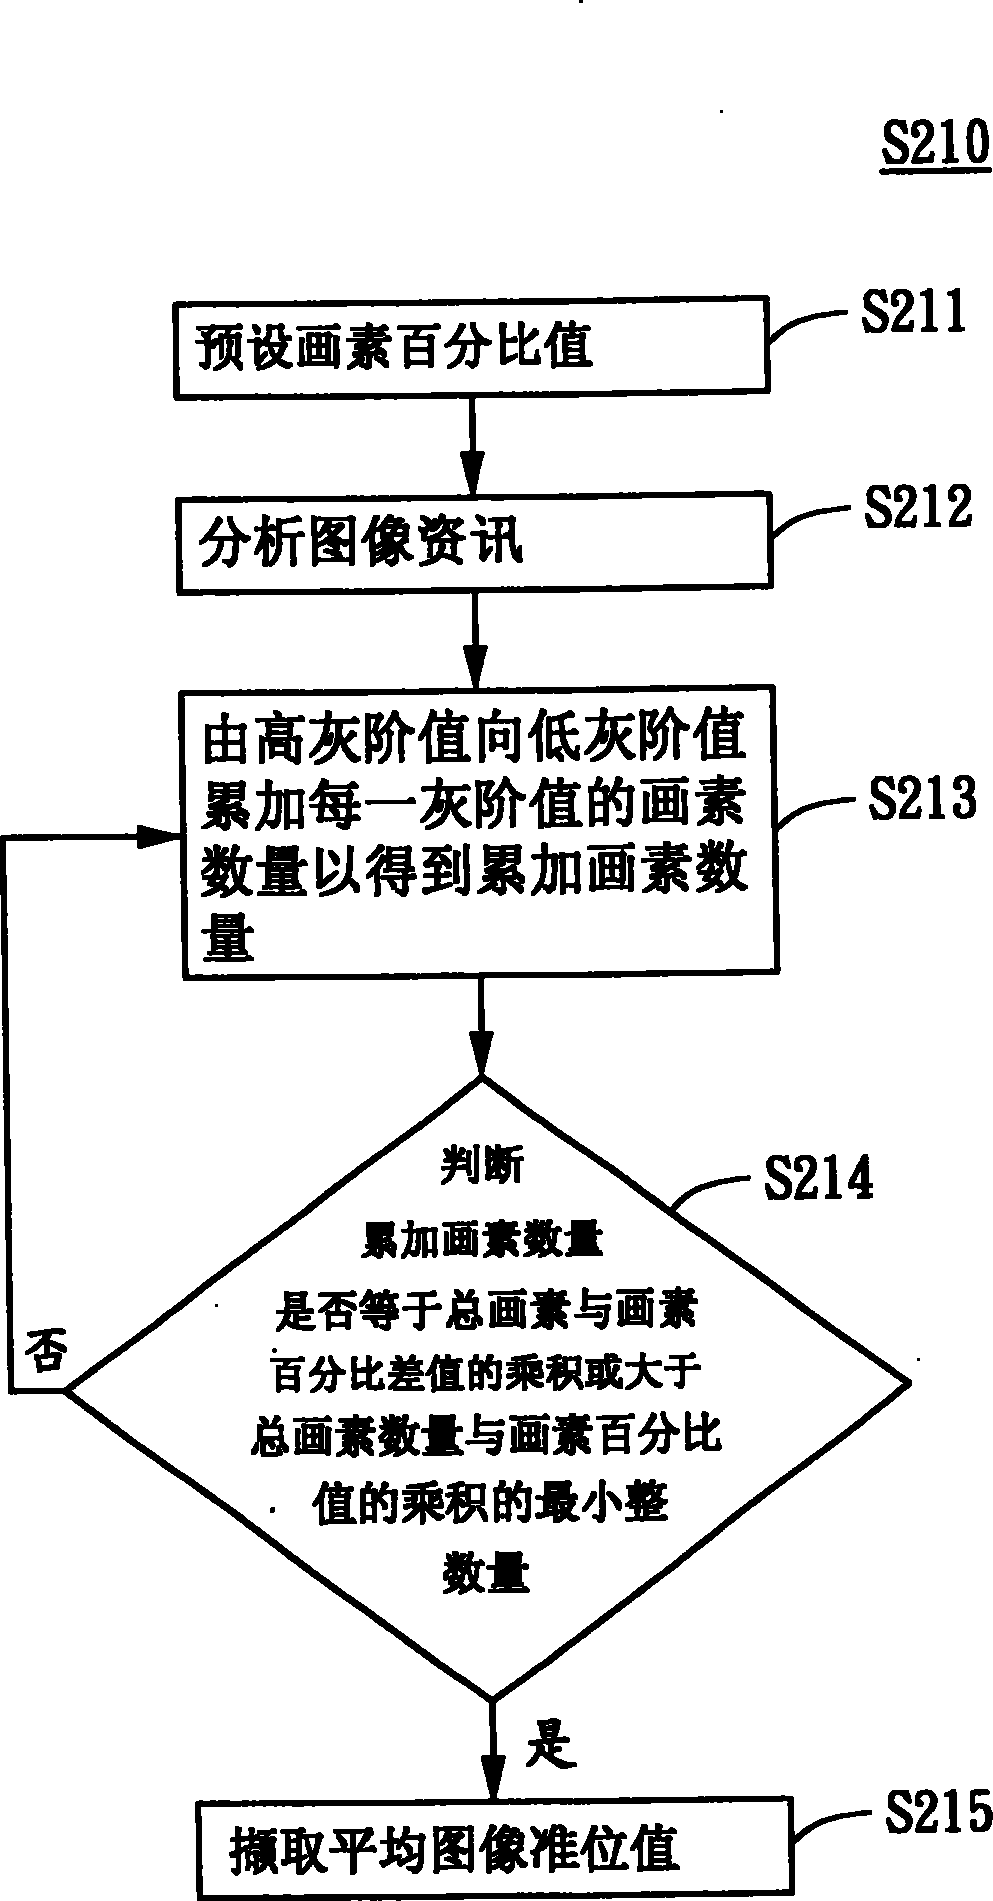 Method for backlight adjustment and image processing